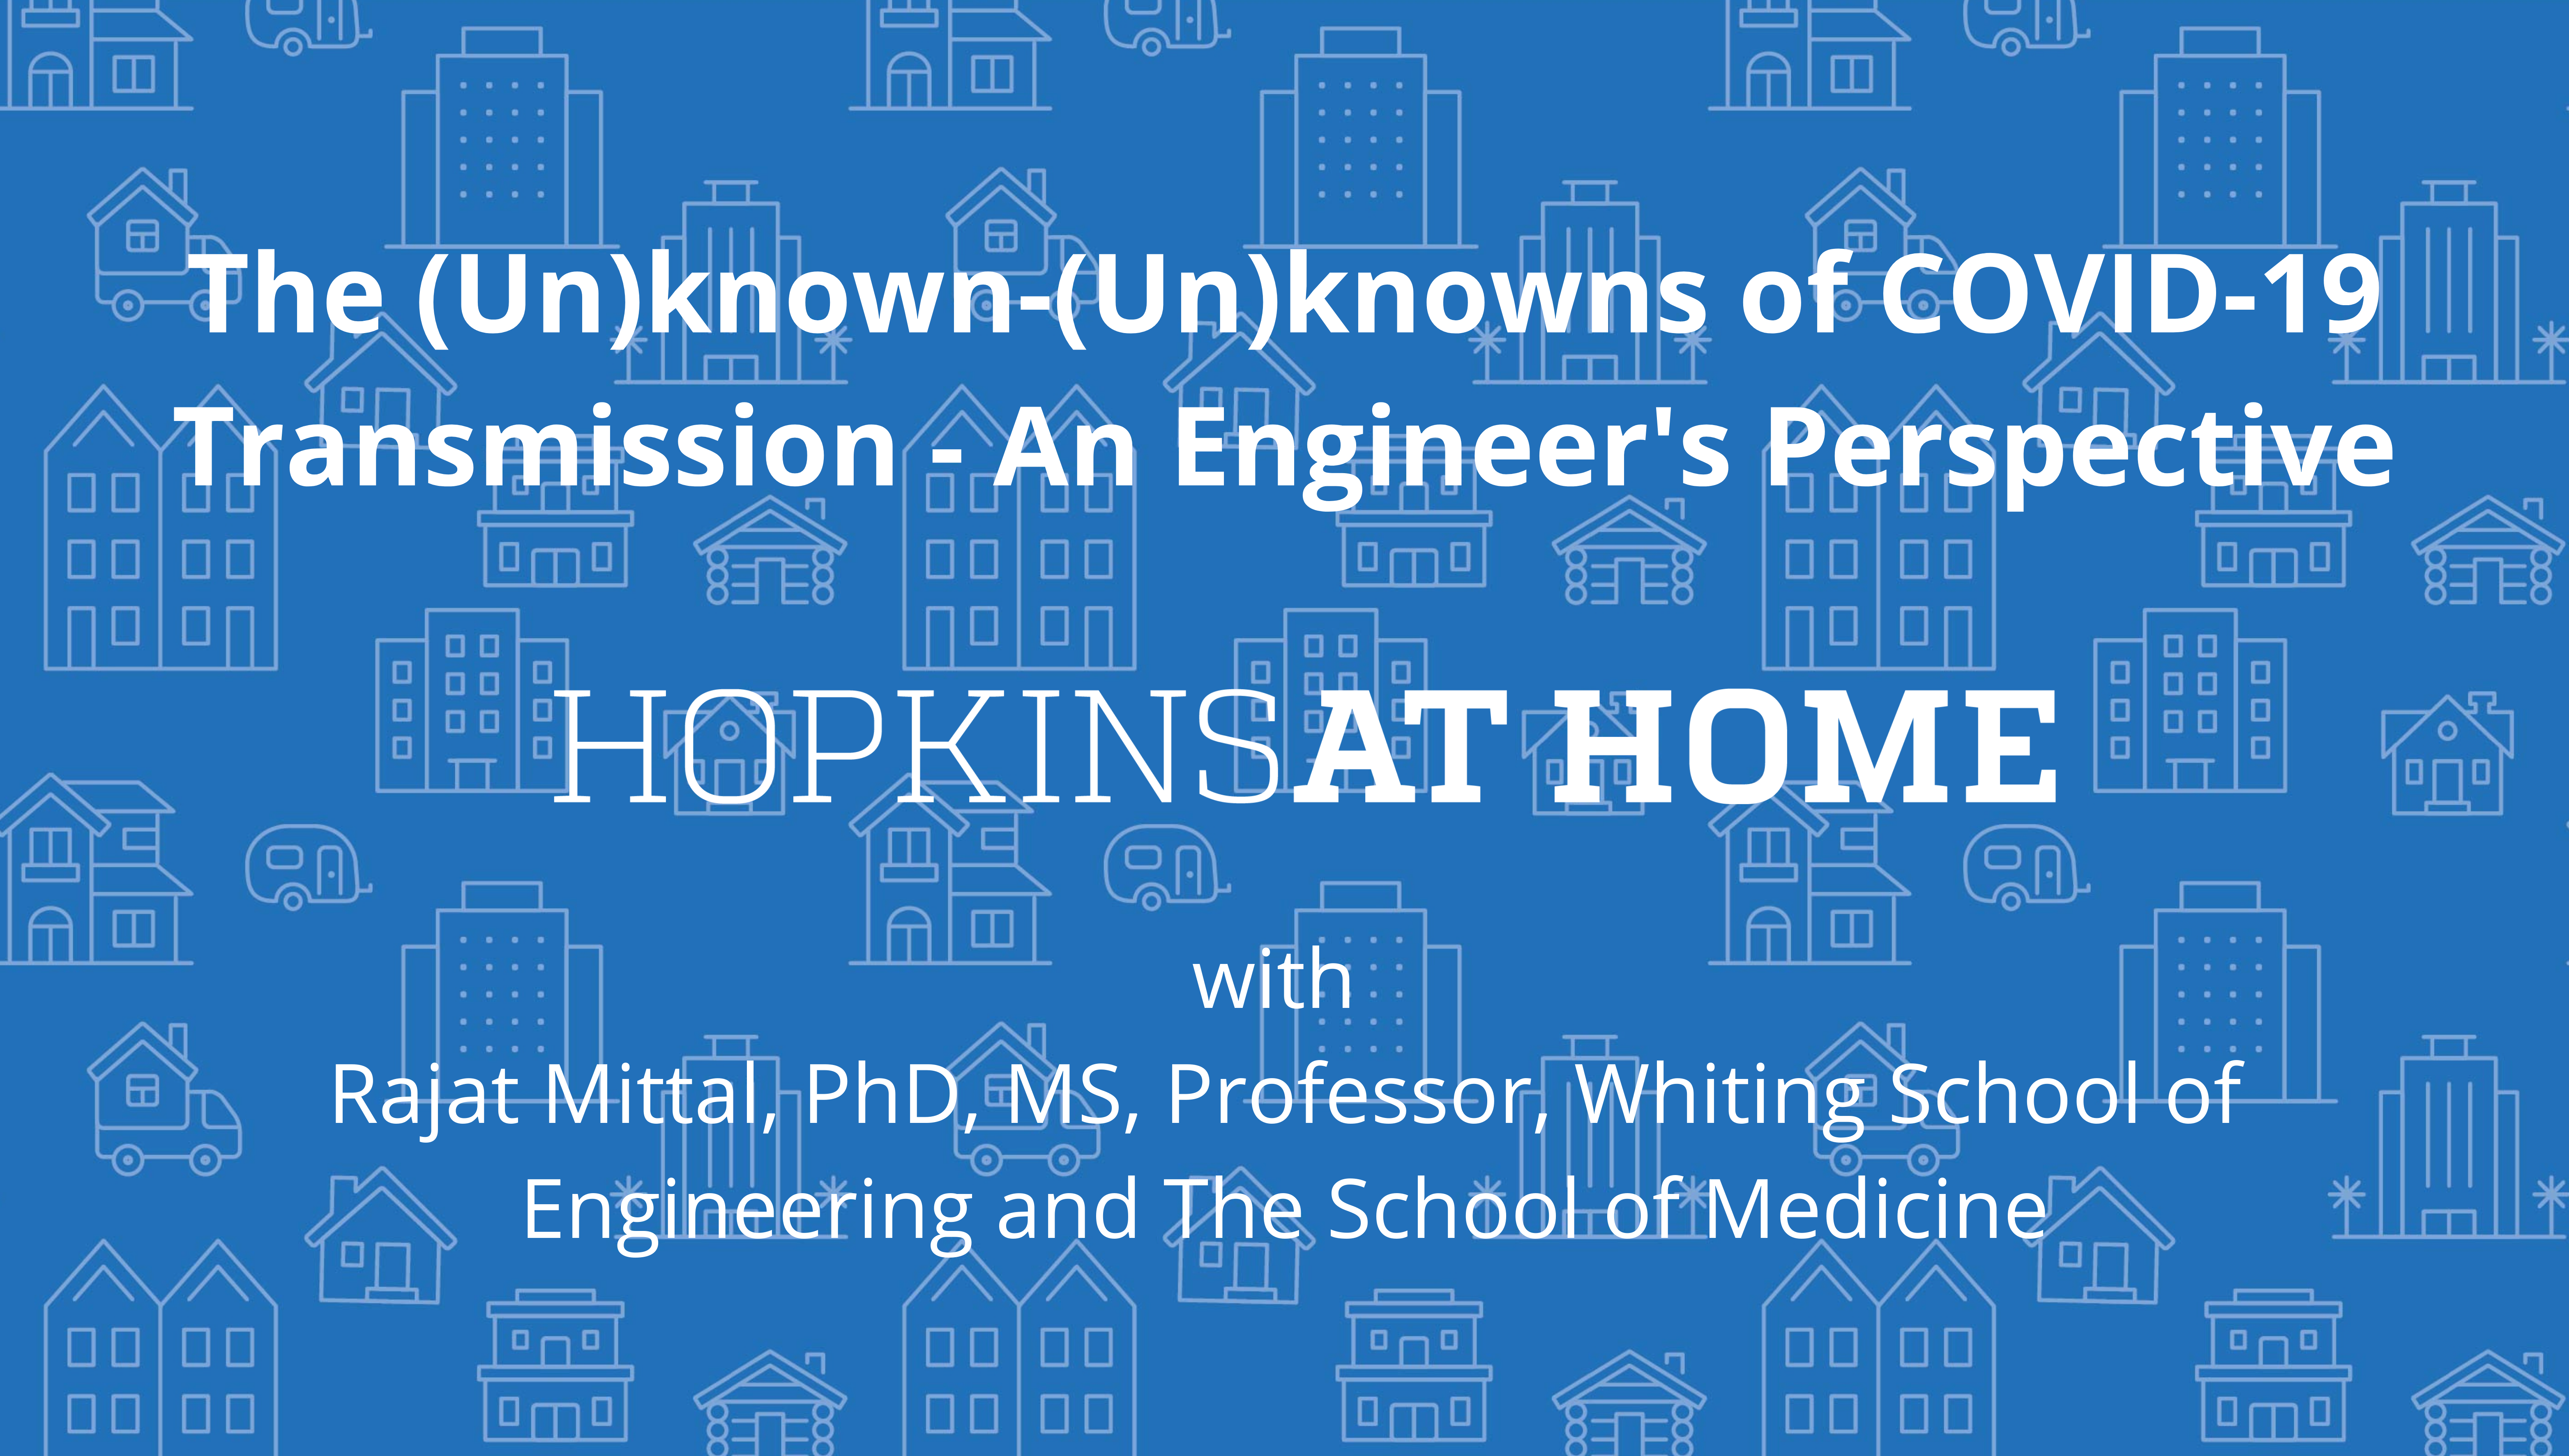 The (Un)known-(Un)knowns of COVID-19 Transmission - An Engineer's Perspective